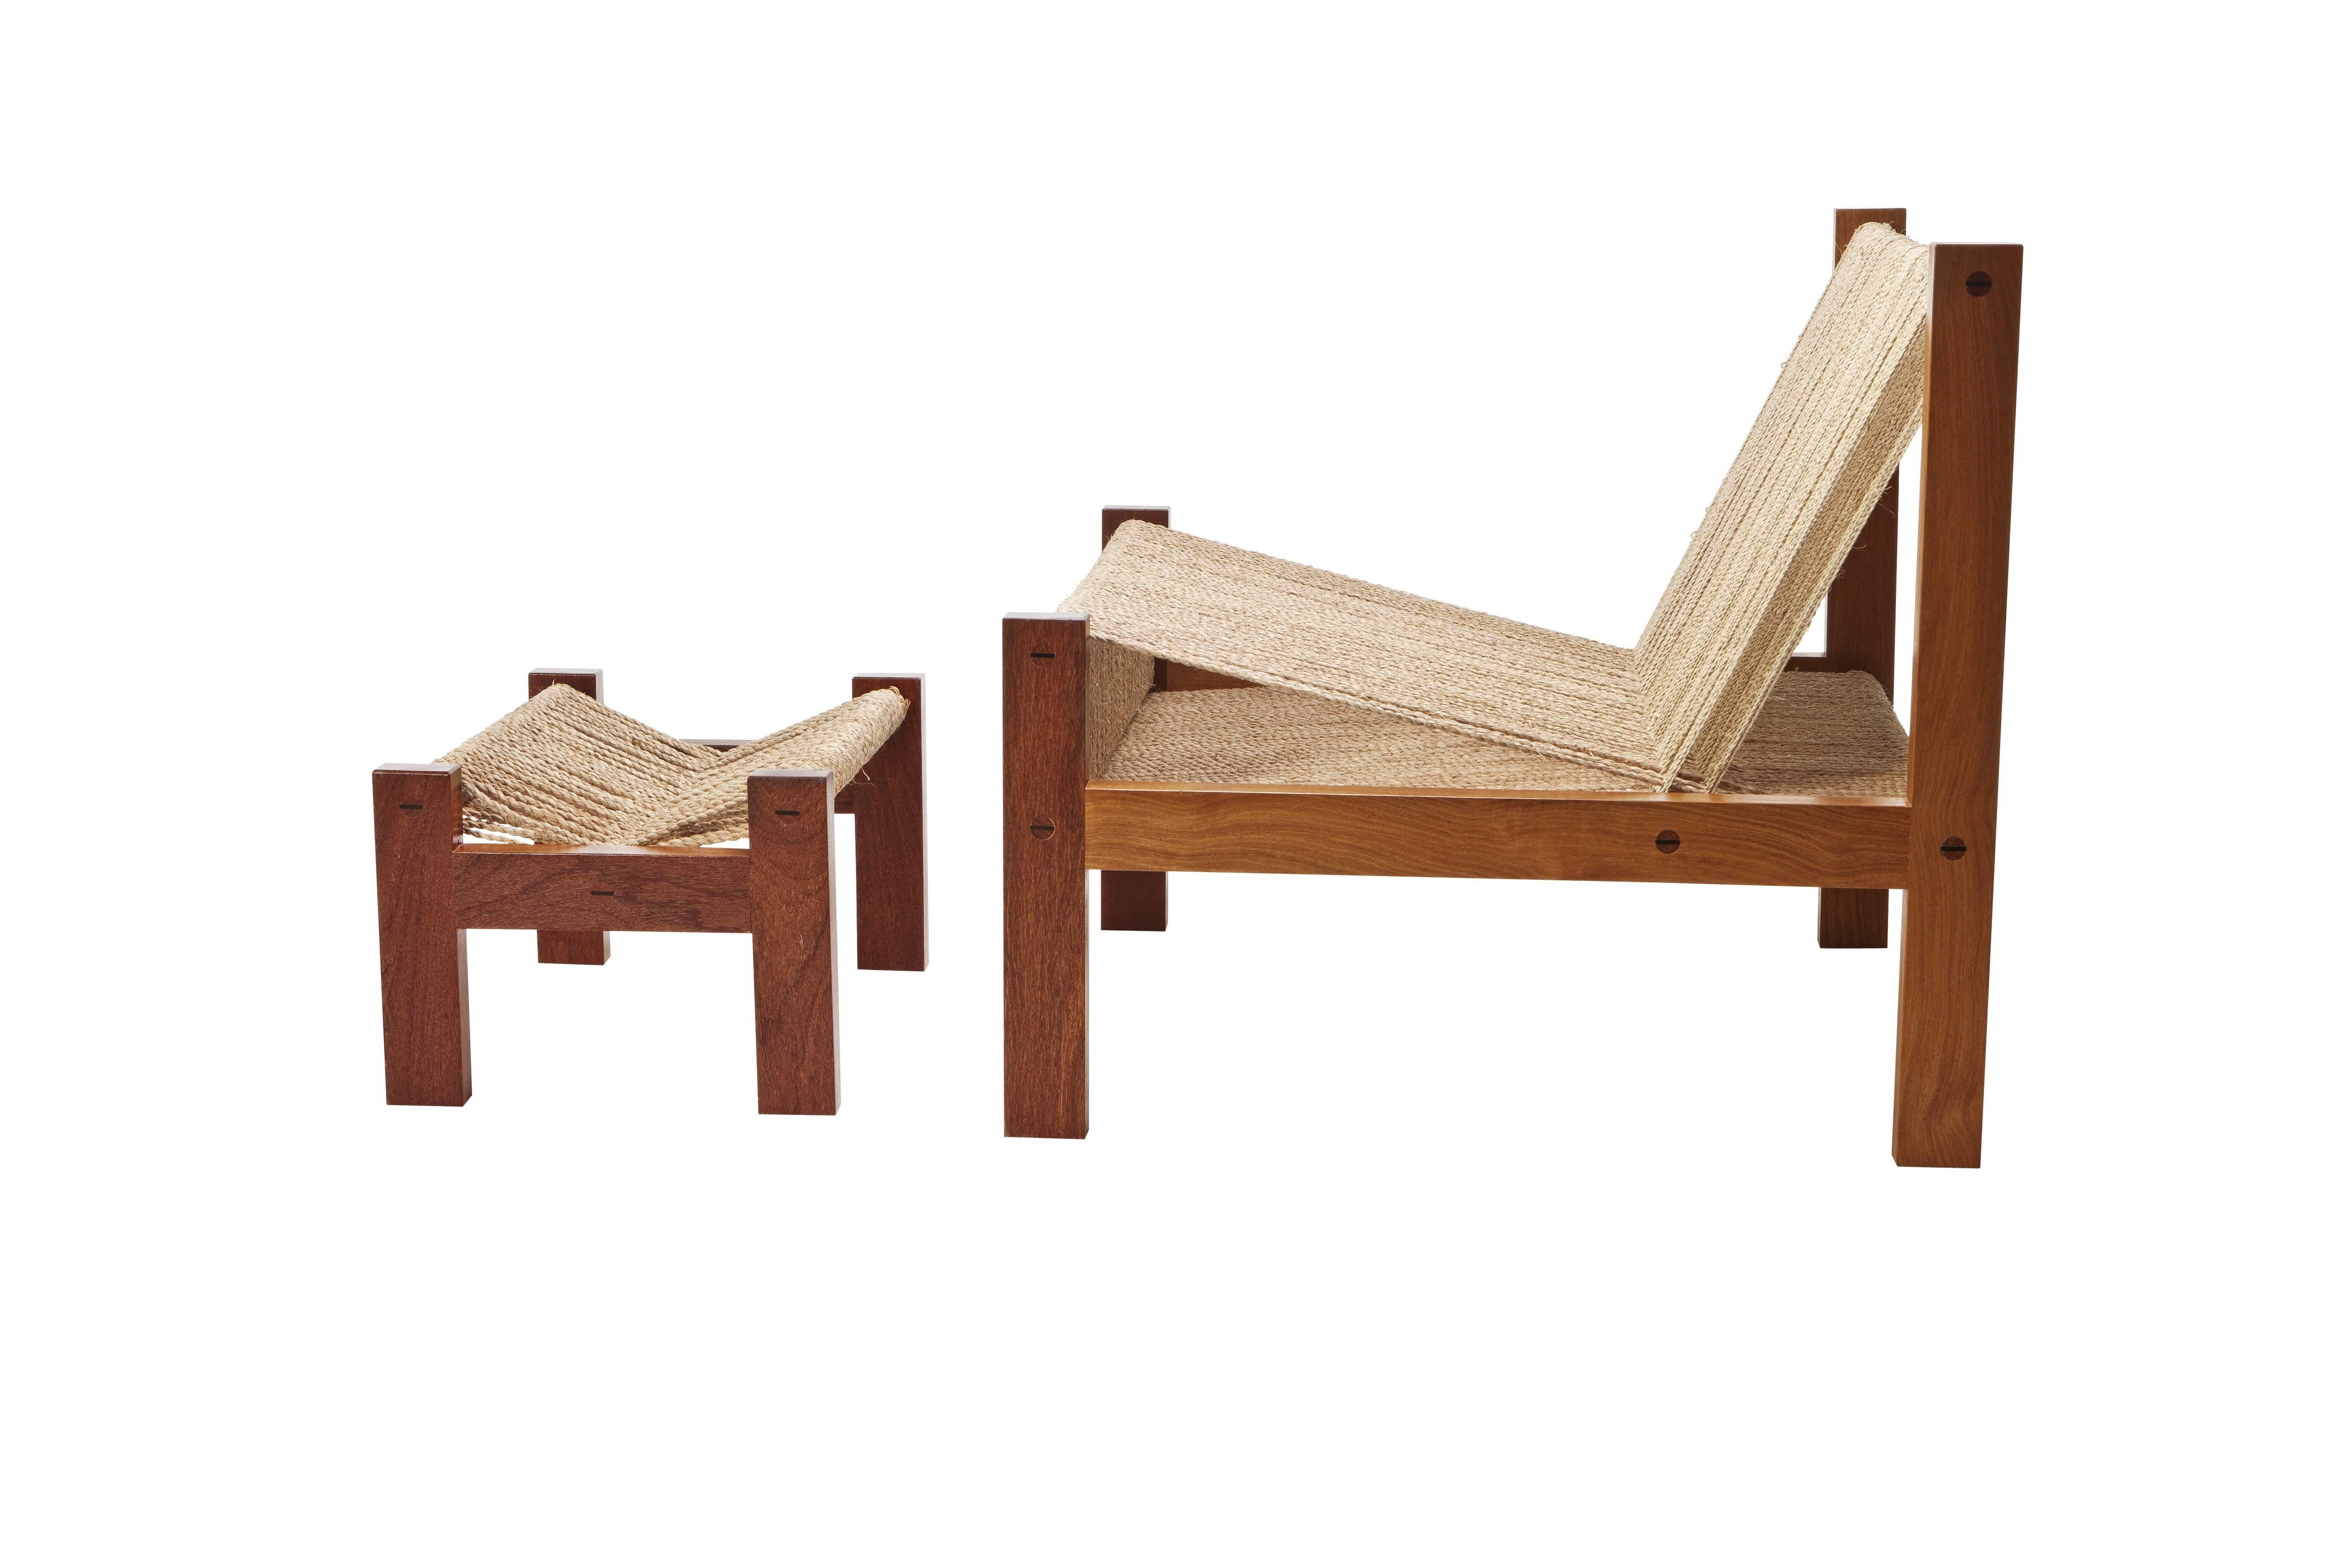 The MAR lounge chair and foot stool ensemble formally evokes traditional weaving looms. The straw that lines the seating is a raw material produced from Buriti leaves, one of the largest palm trees of the Brazilian cerrado. Particularly soft, light